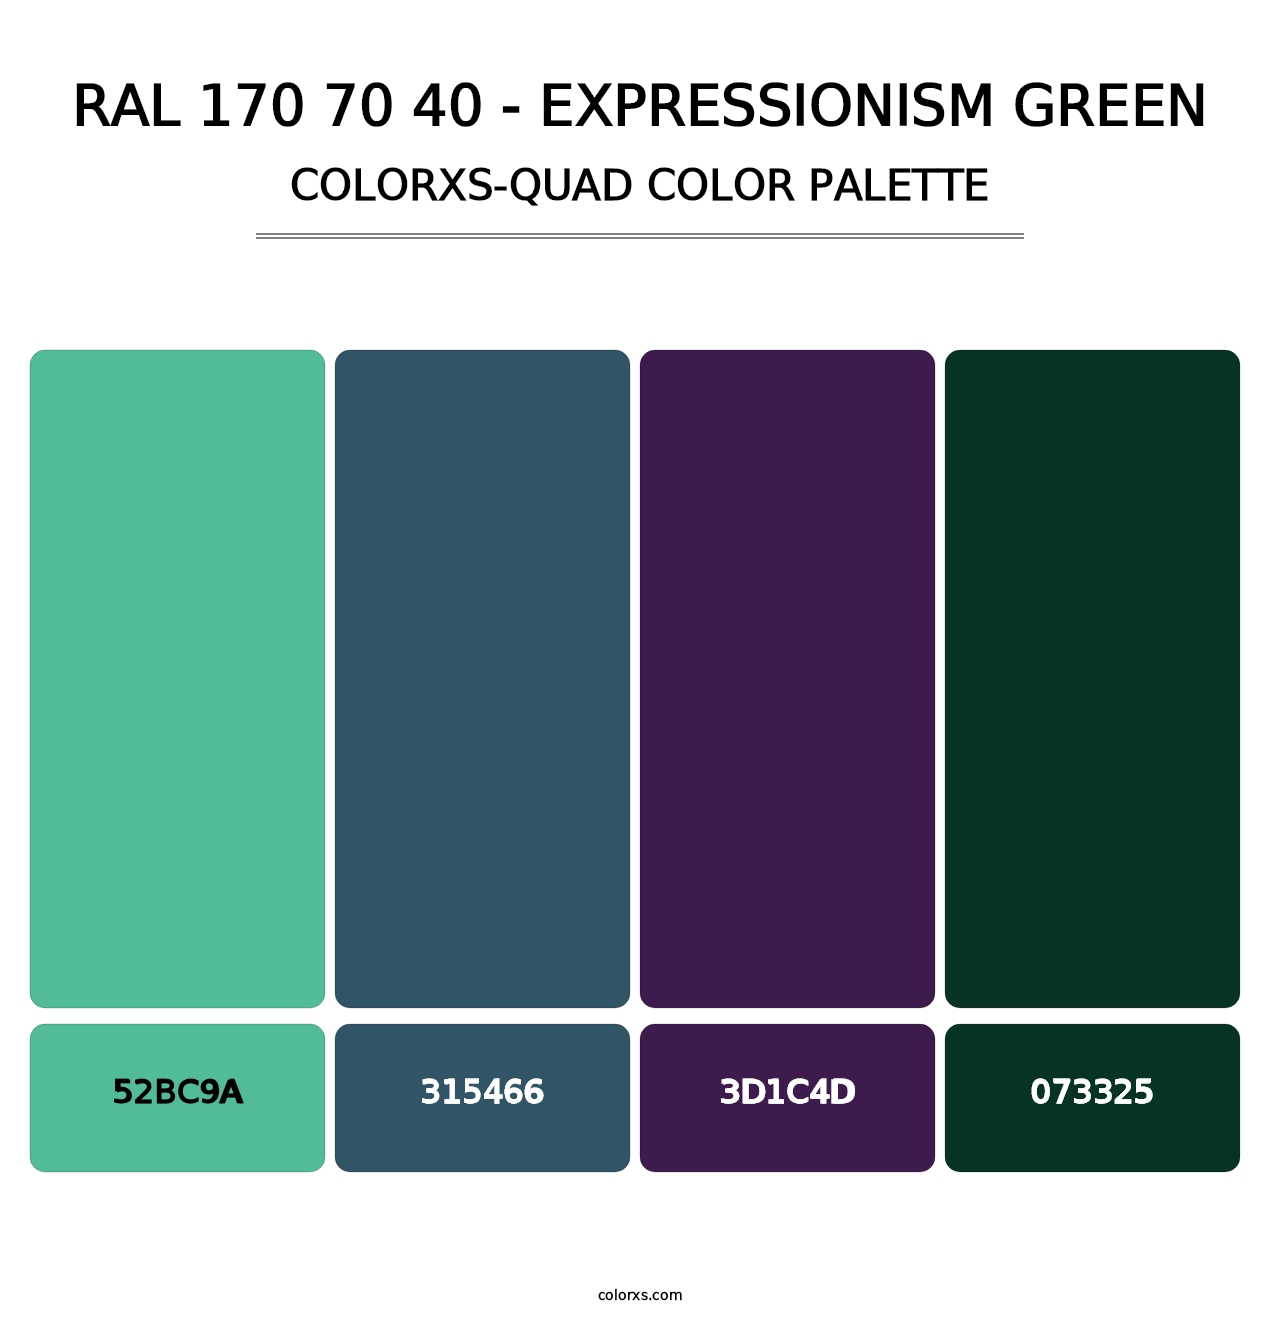 RAL 170 70 40 - Expressionism Green - Colorxs Quad Palette